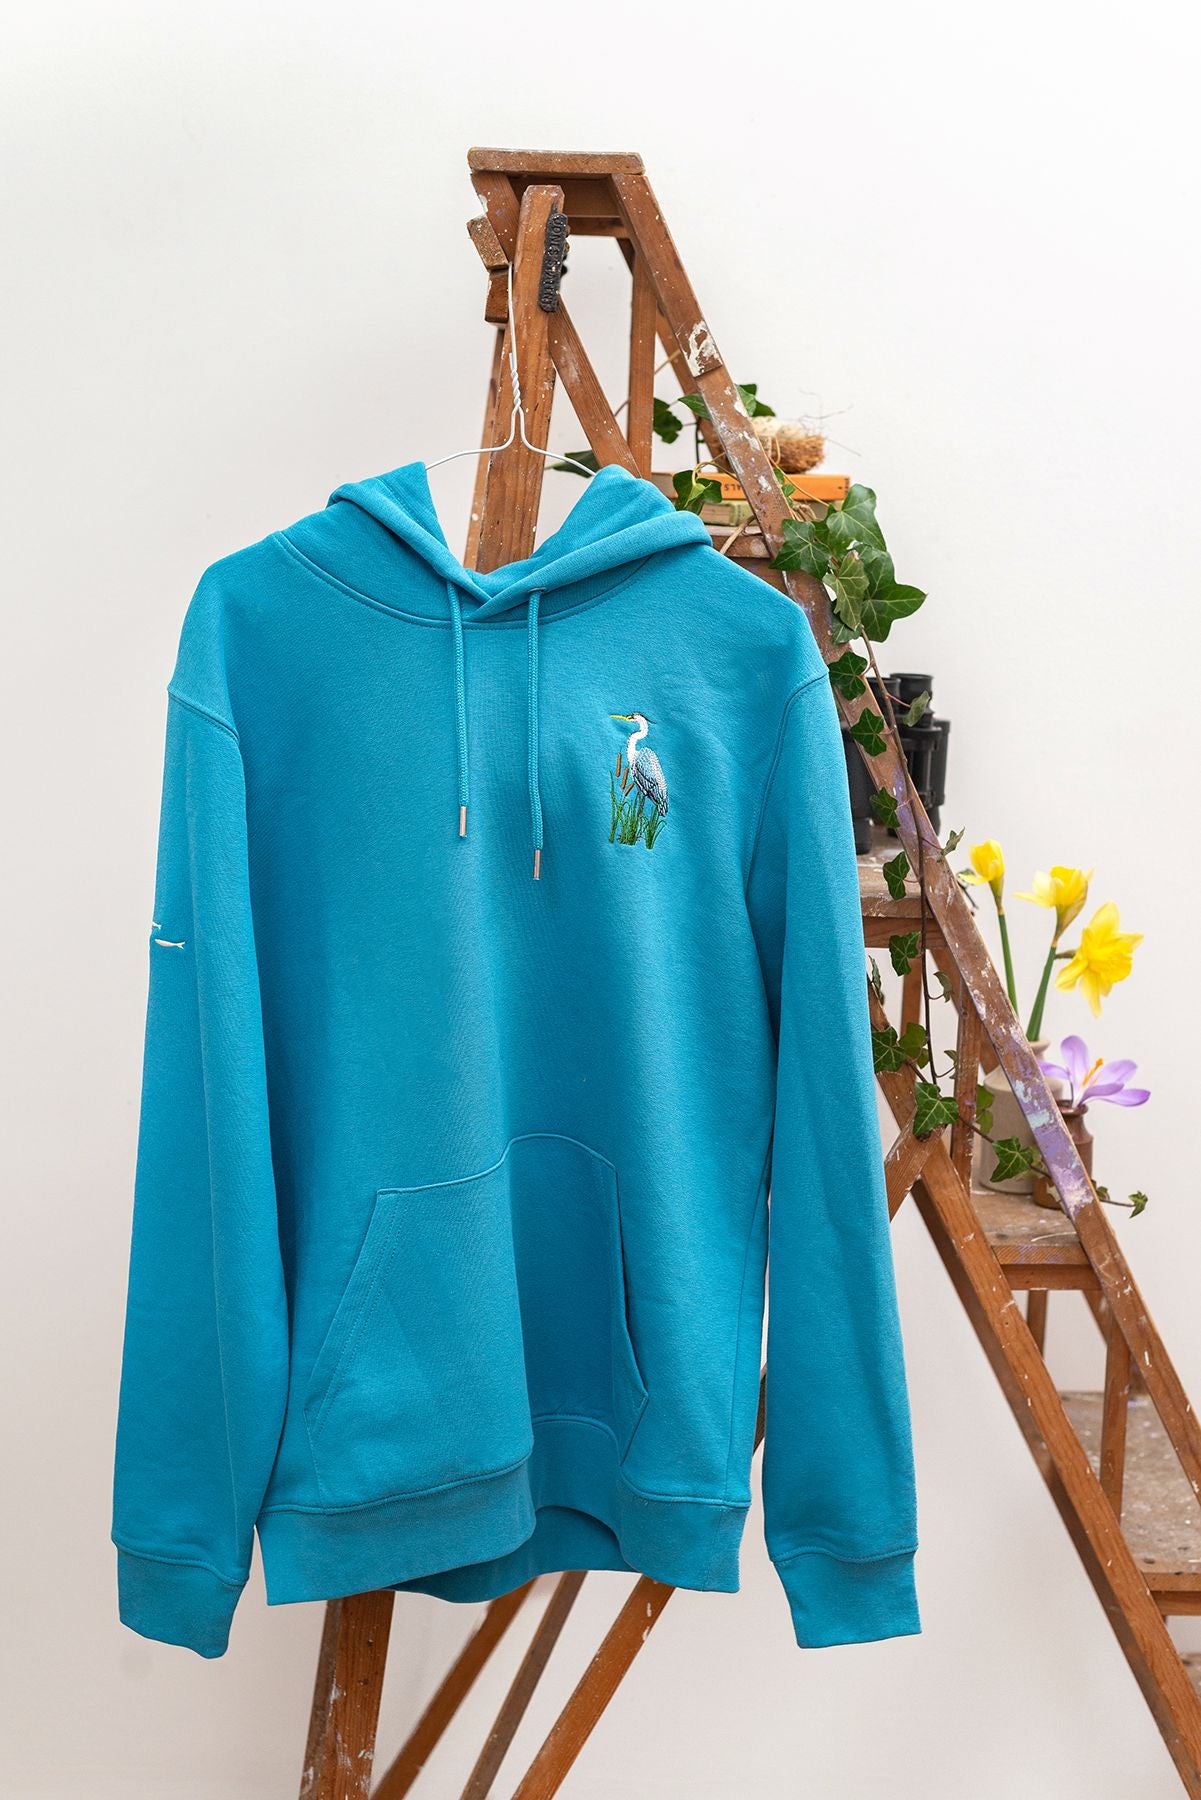 Heron Embroidered Organic Hooded top